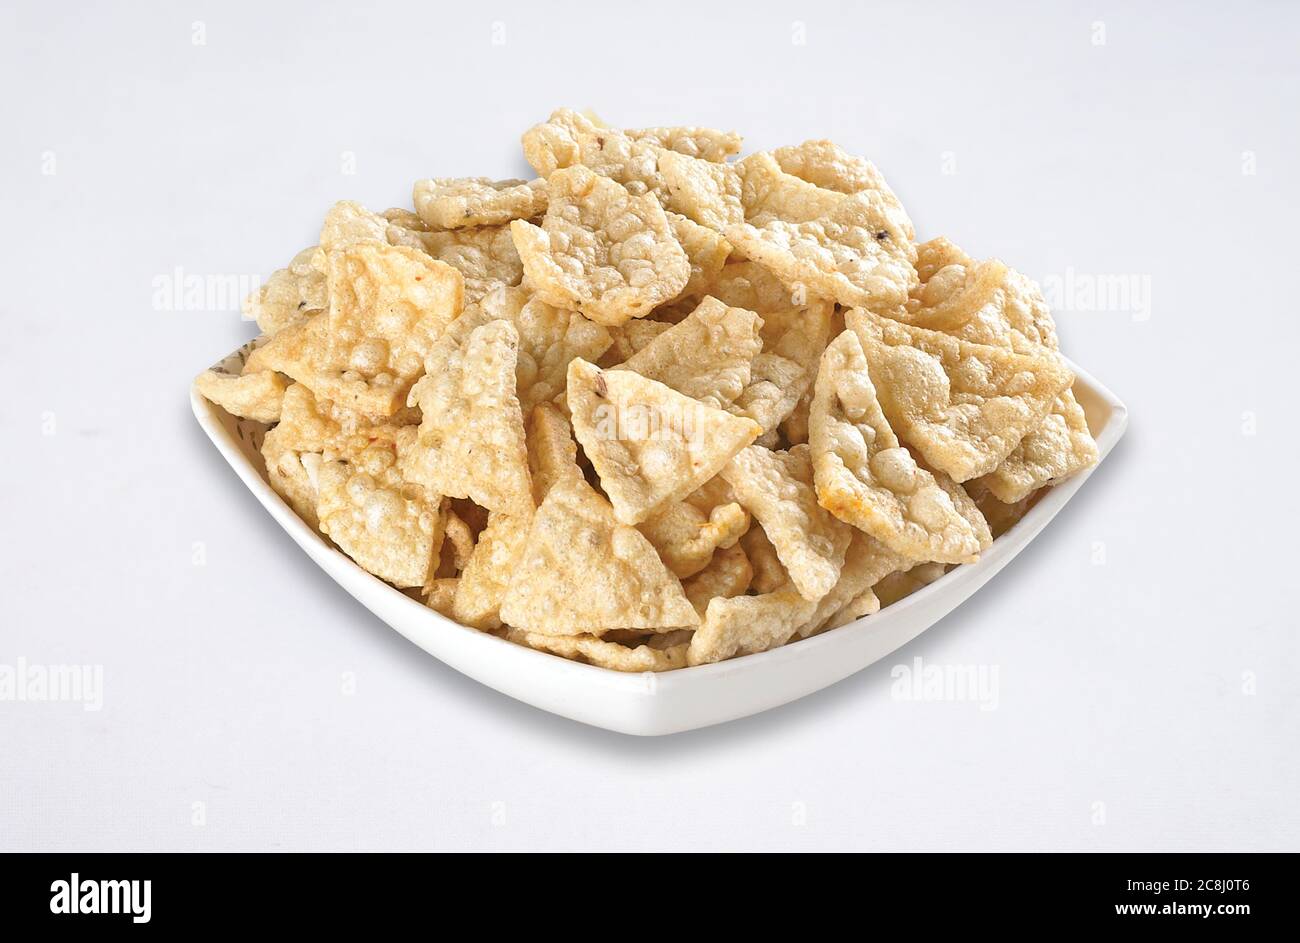 Deep fried Khichiya Papad, Traditional Indian Snacks, Indian crunchy fried snack papad or Papadam made of rice floor served in a plate. Also known as Stock Photo